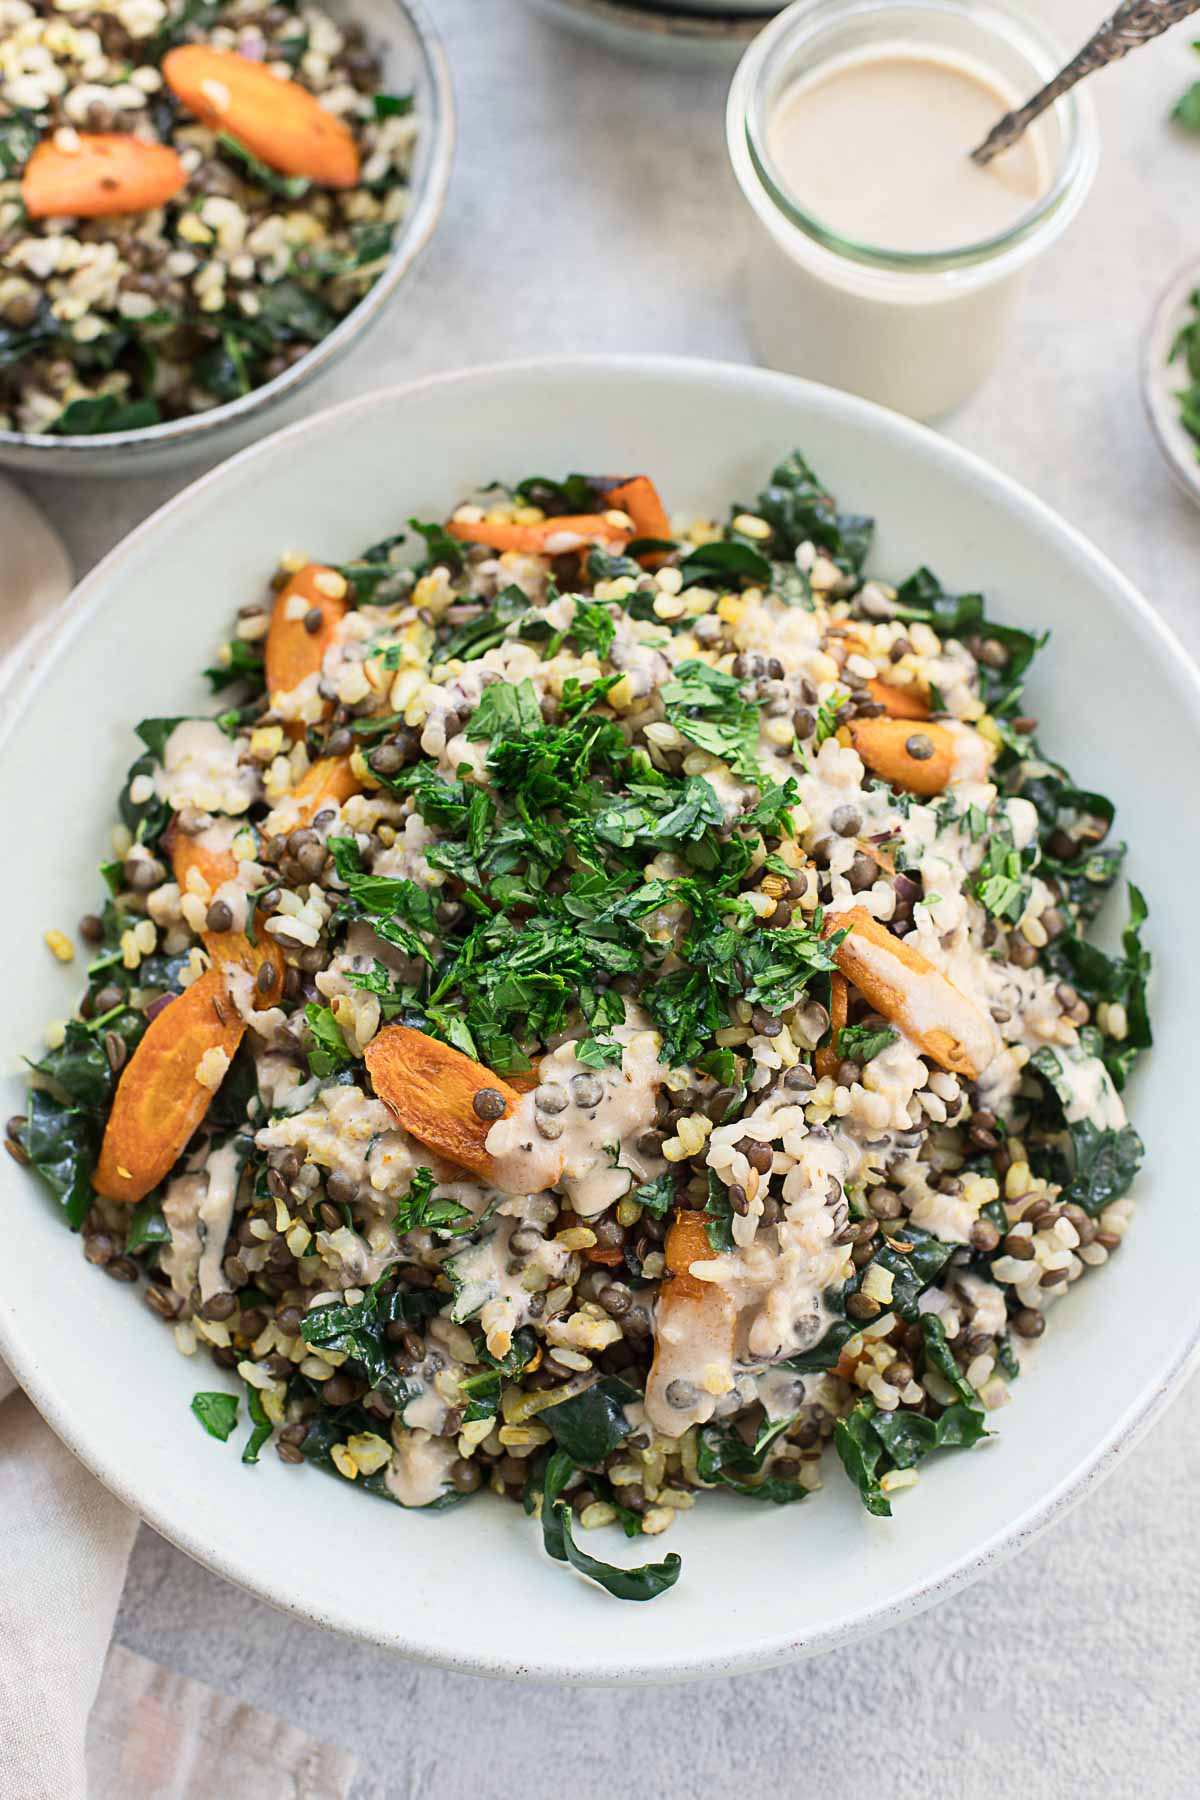 Lentil-Rice Salad with Roasted Carrots and Tahini Dressing